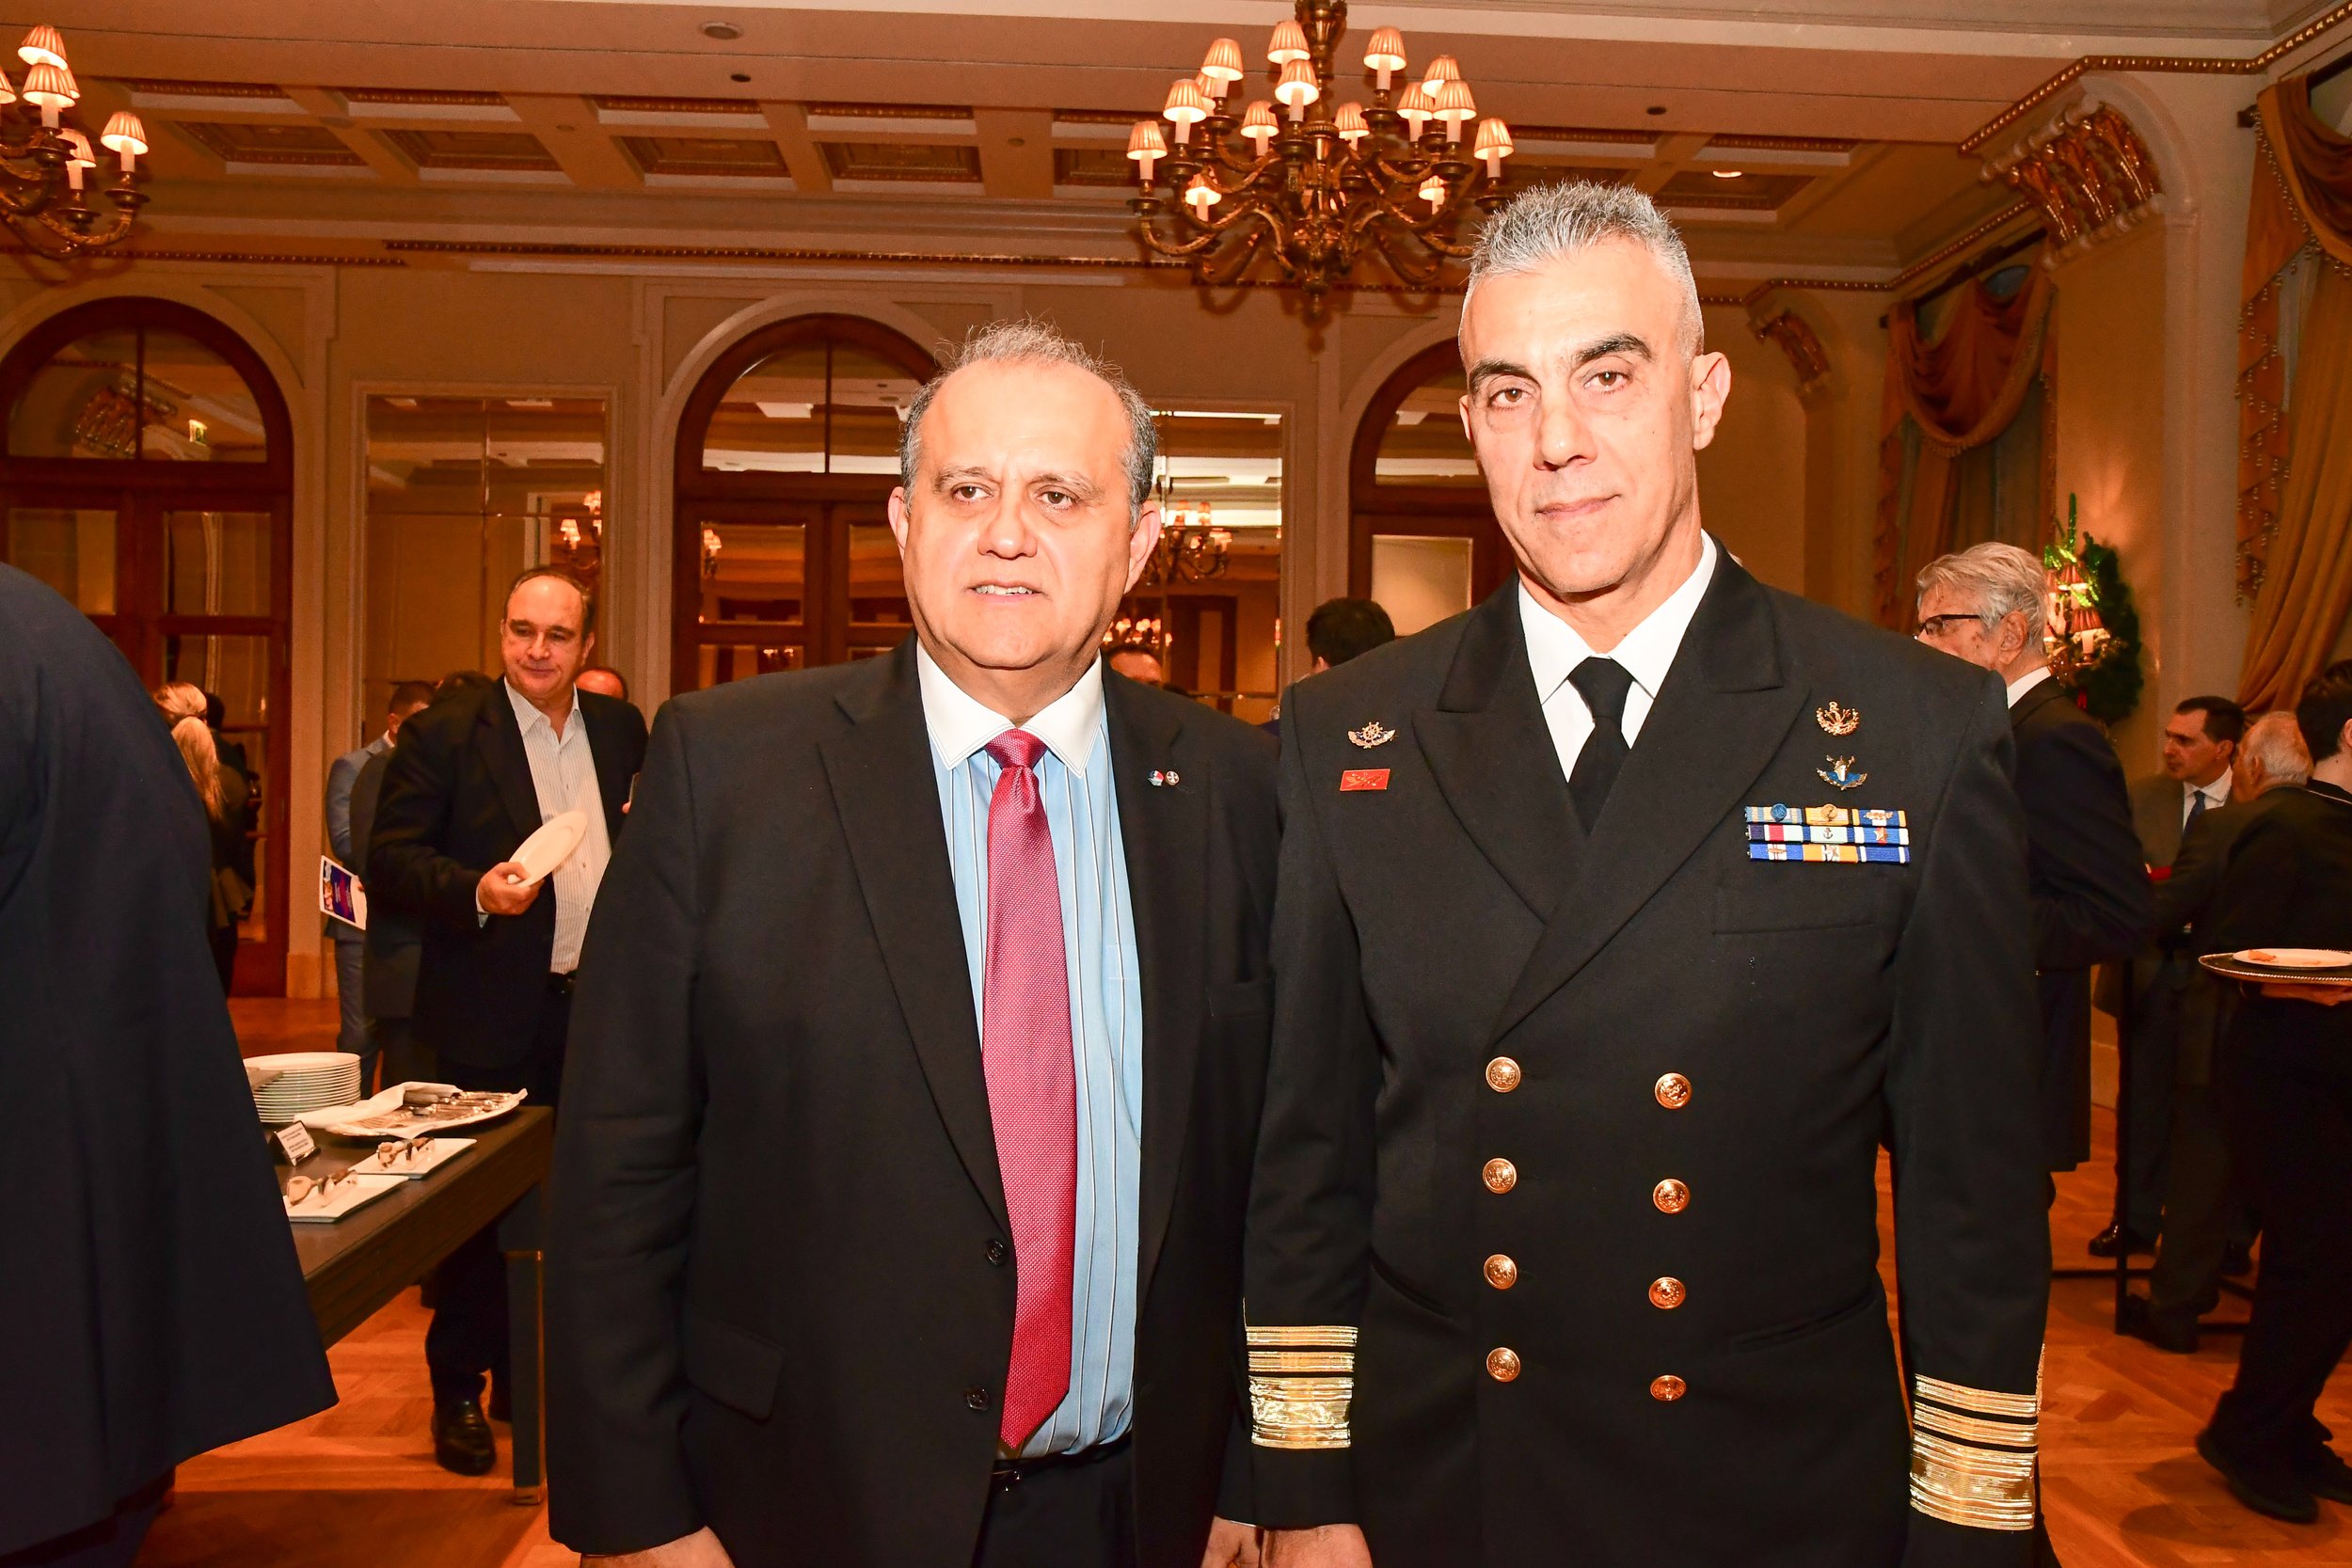  Lariagkis with Vice Admiral Fragkiskos Leloudas HN, Deputy Chief of Hellenic National Defence General Staff 